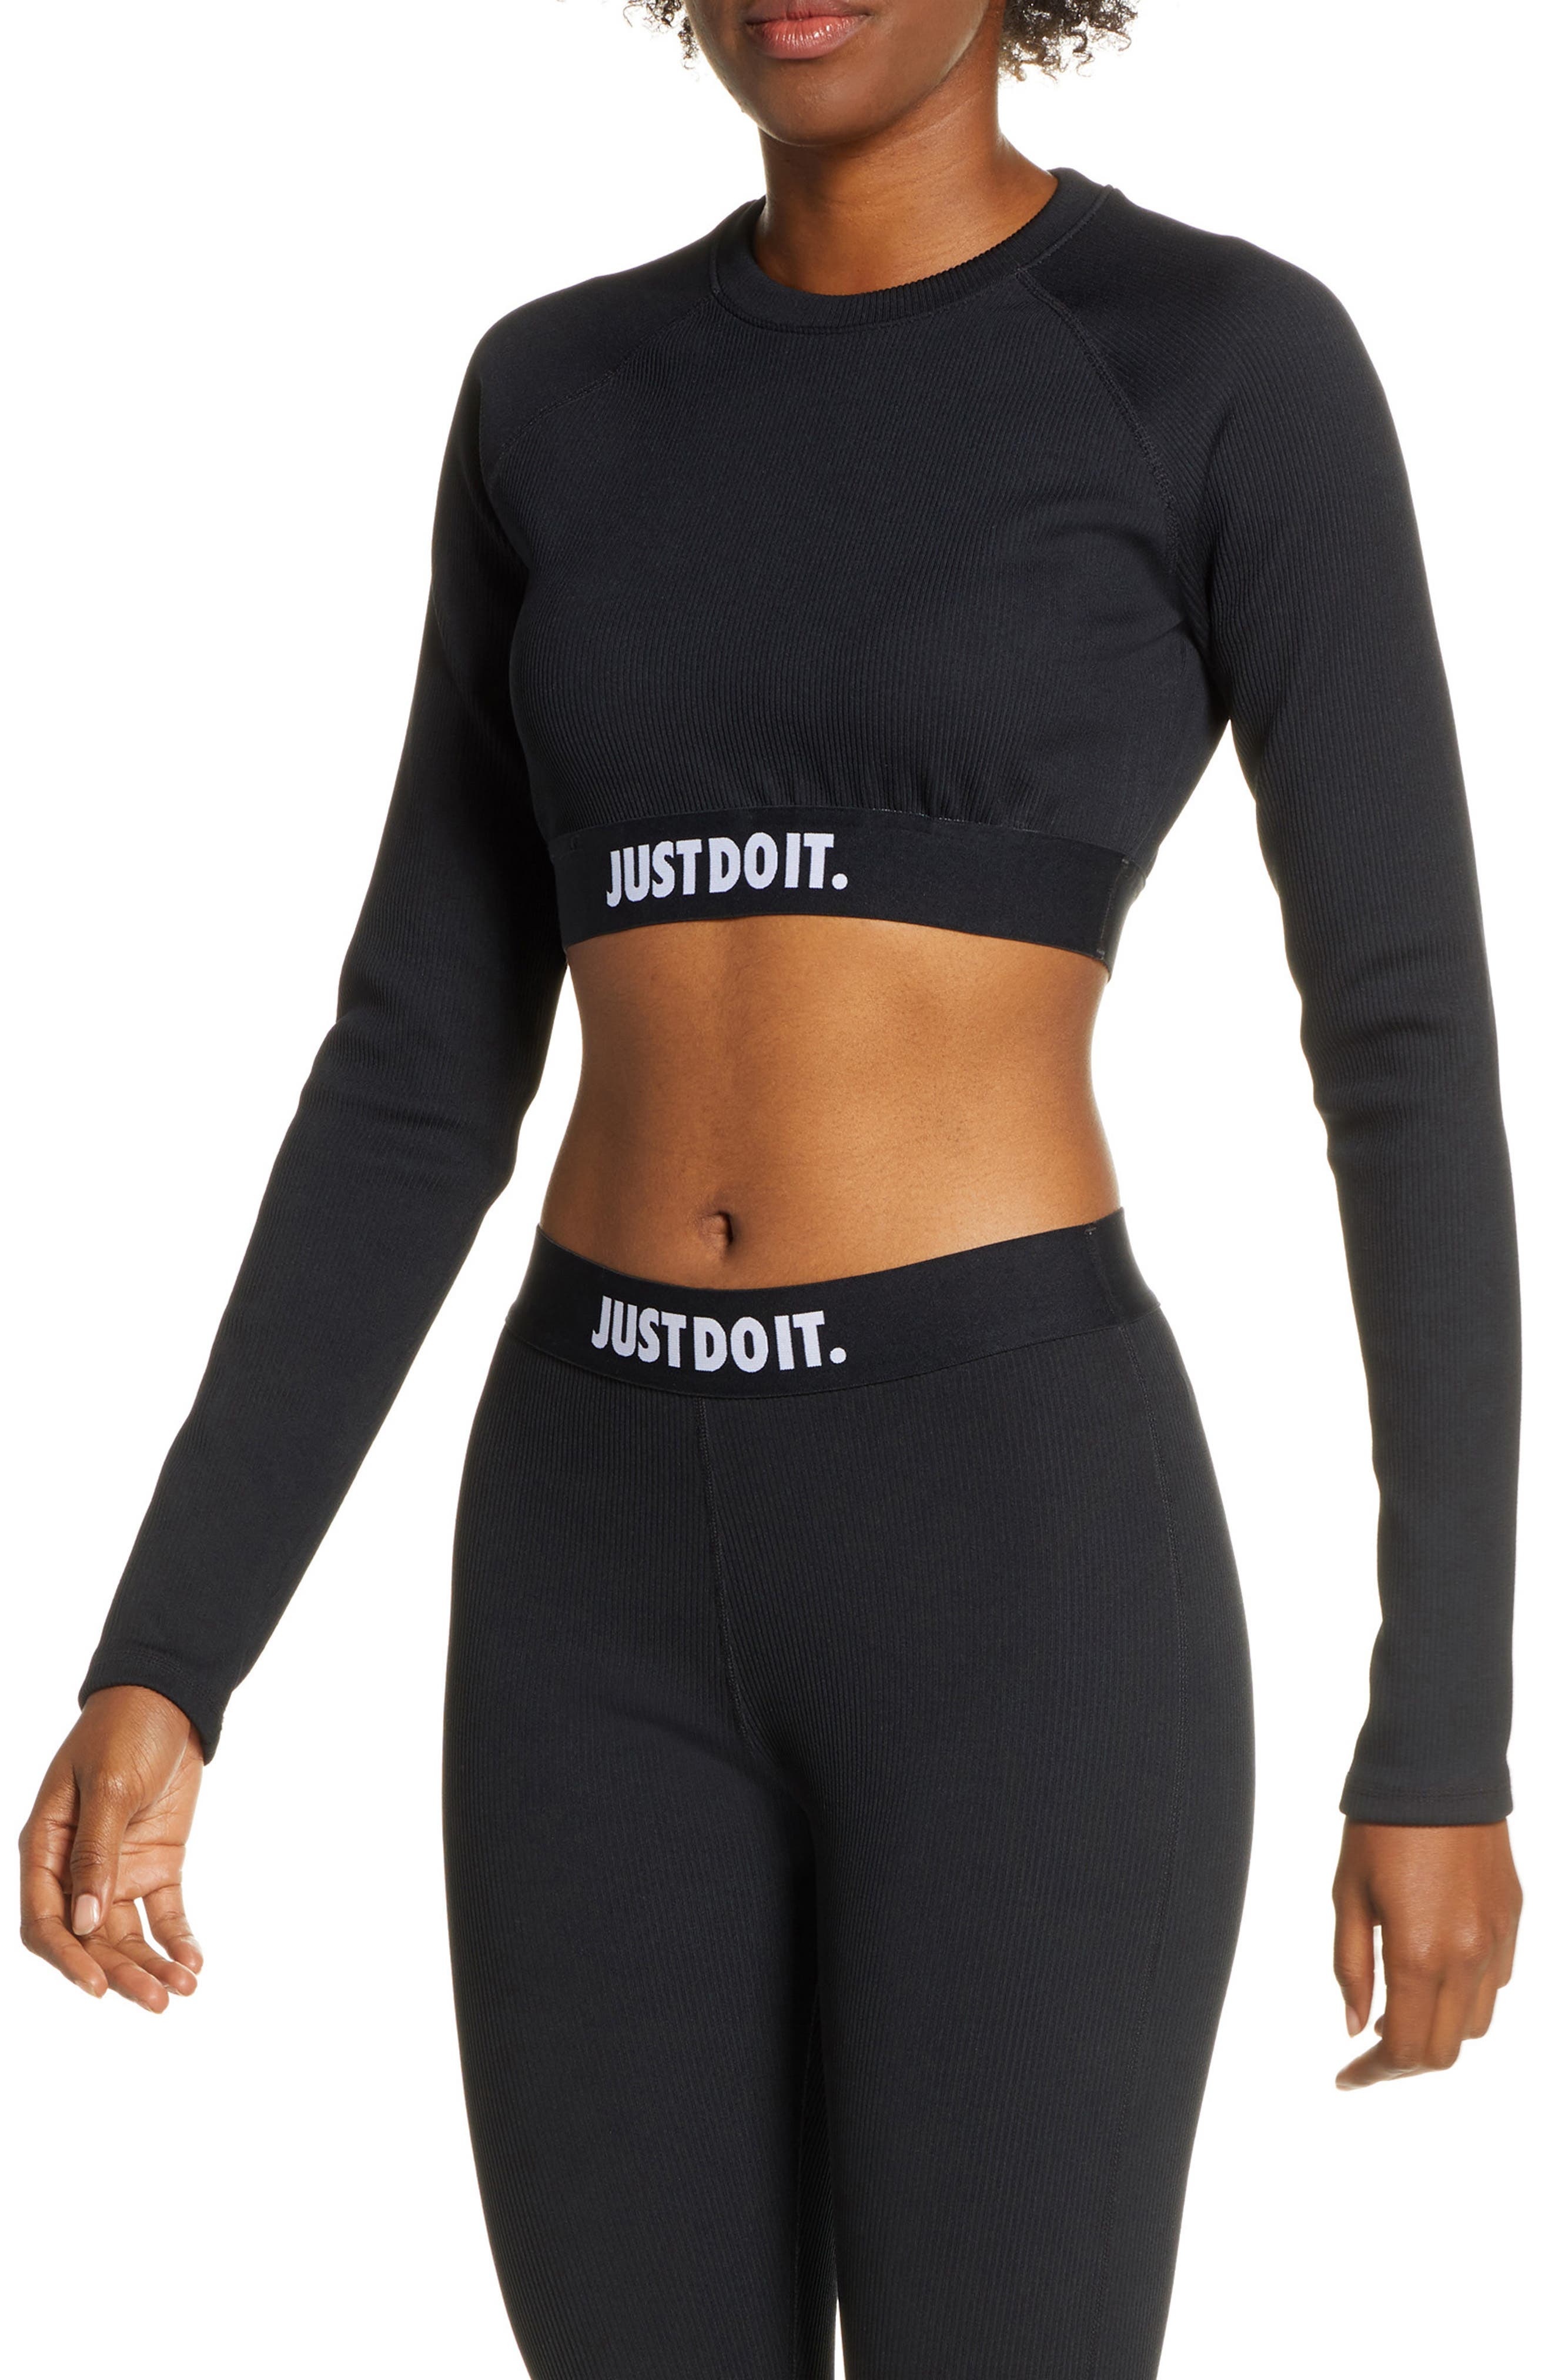 nike just do it ribbed crop top